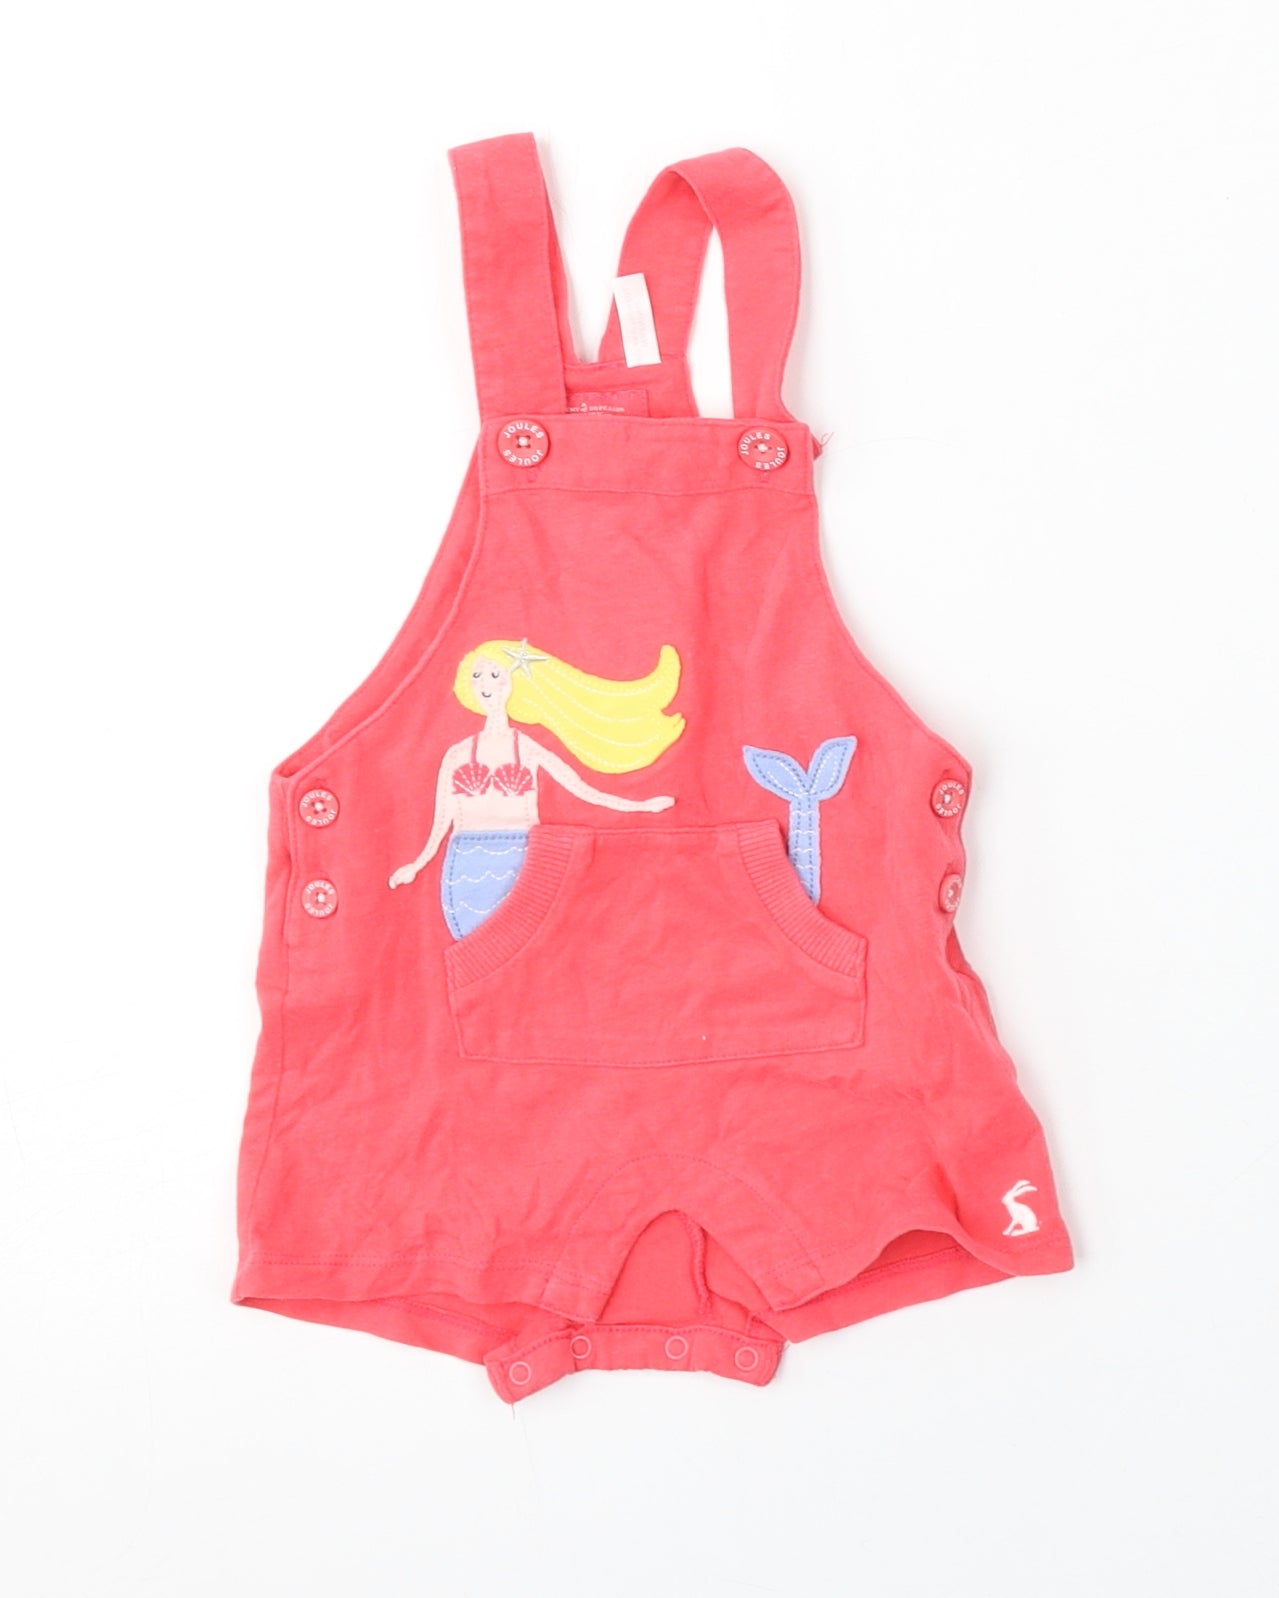 Joules Girls Pink  Cotton Dungaree One-Piece Size 3-6 Months